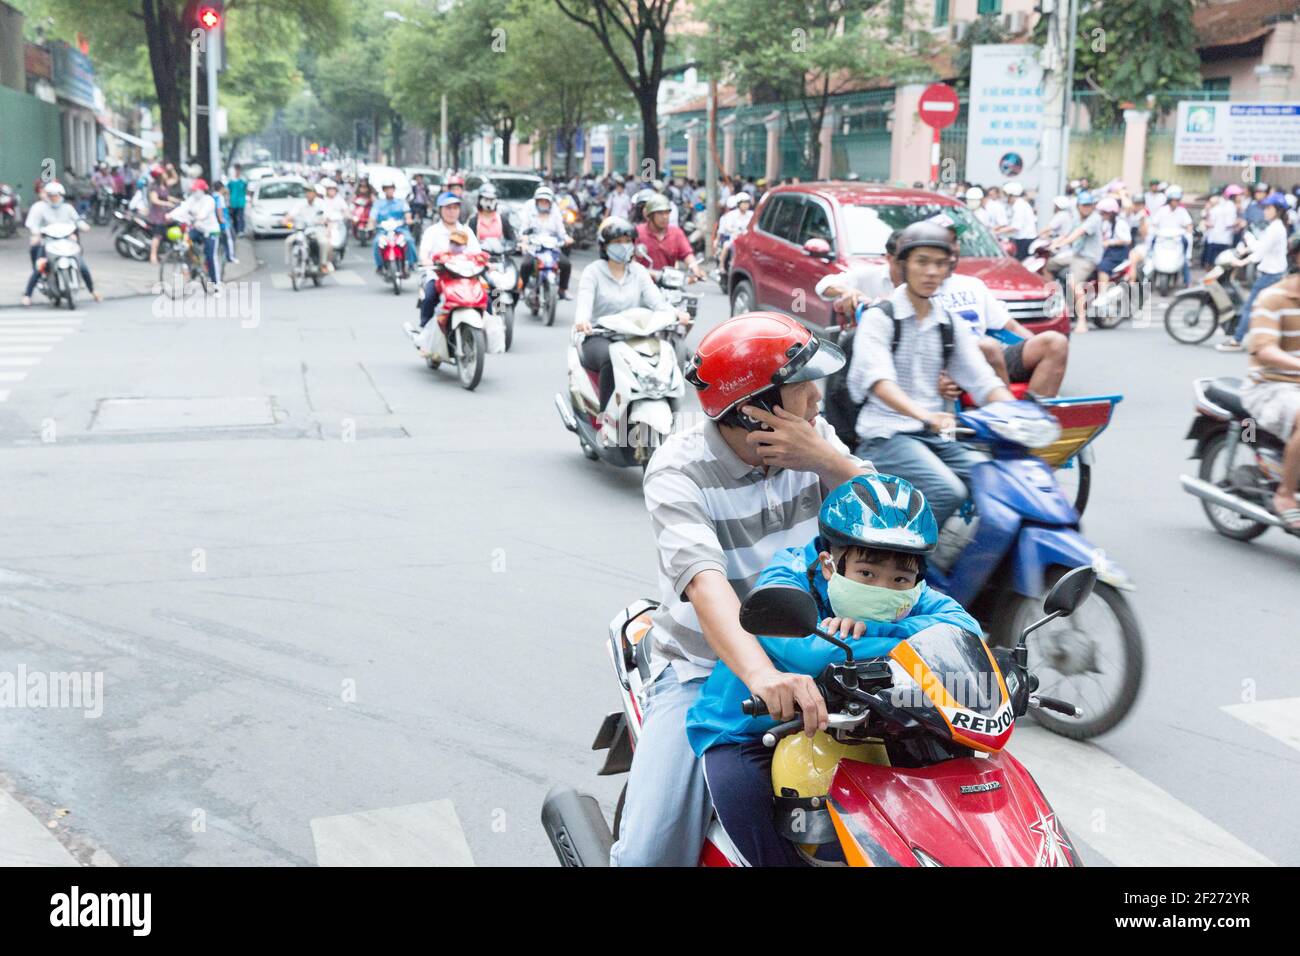 Vietnam, Ho Chi Minh City - Father and son on a scooter filled with other scooters during the early evening commute. Stock Photo